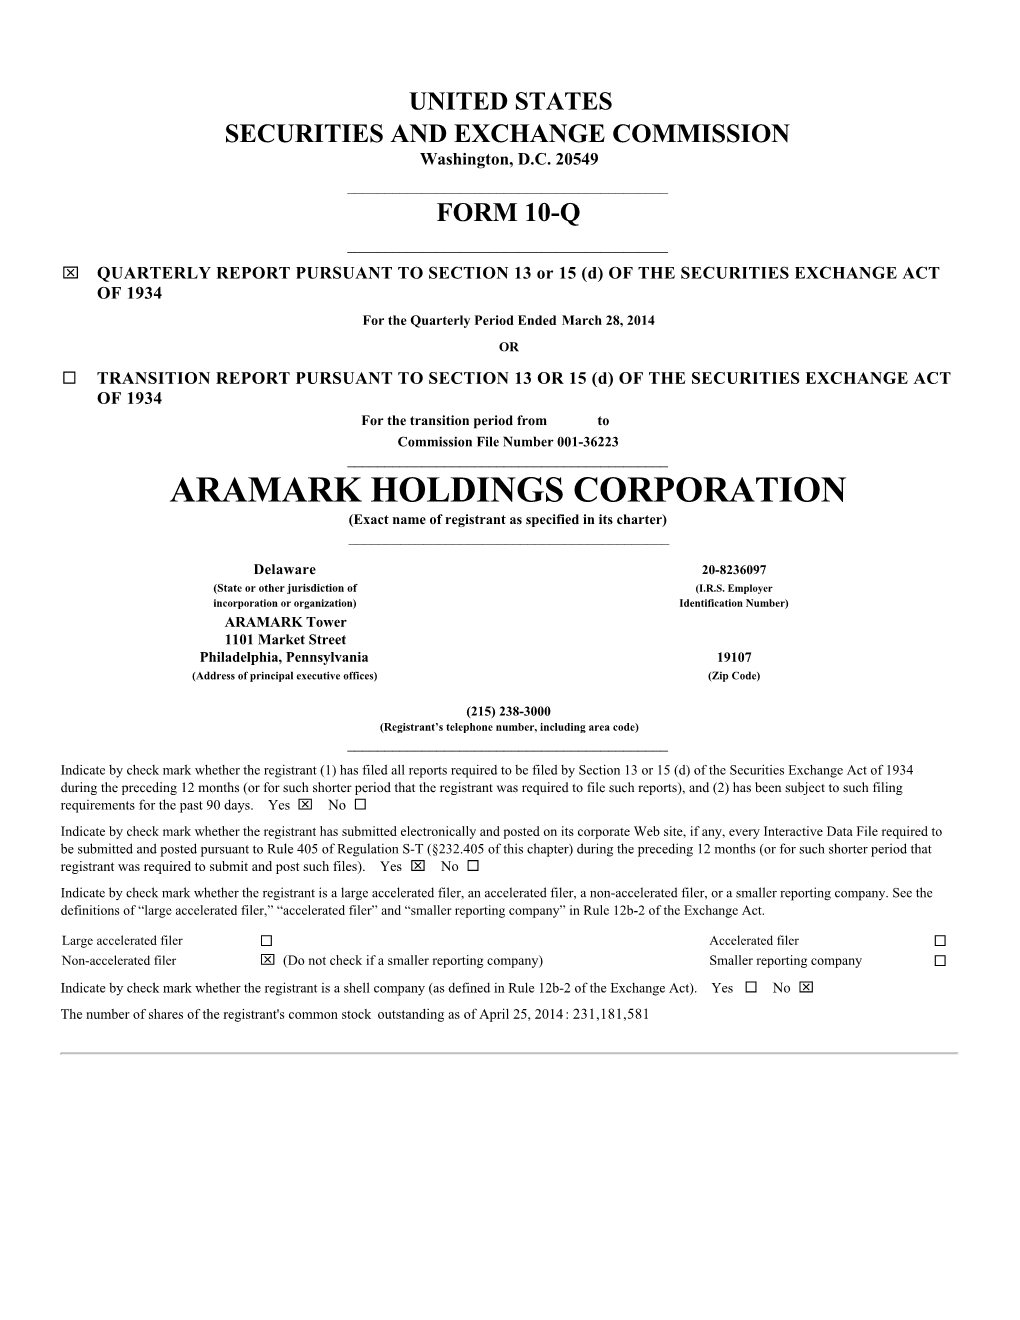 ARAMARK HOLDINGS CORPORATION (Exact Name of Registrant As Specified in Its Charter) ______